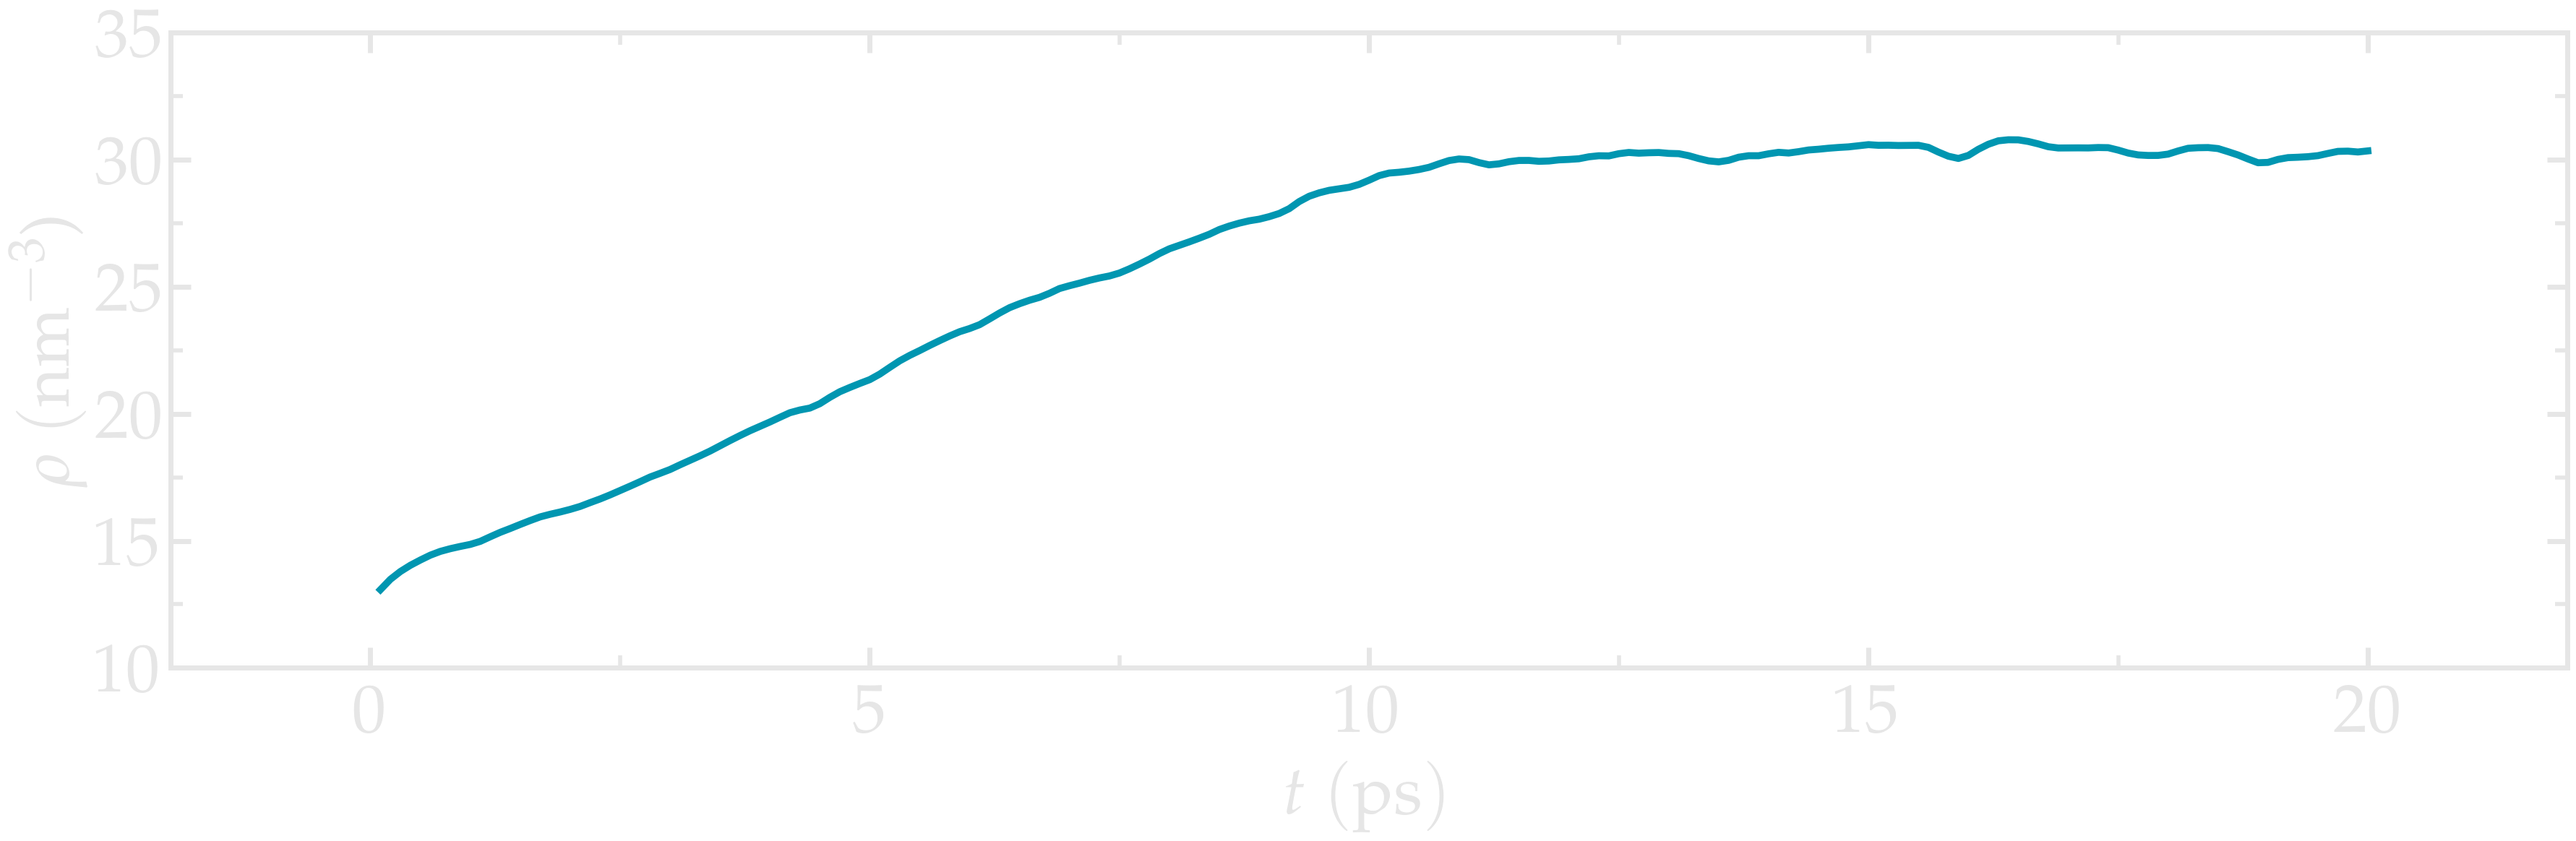 Curves showing the equilibration of the water reservoir